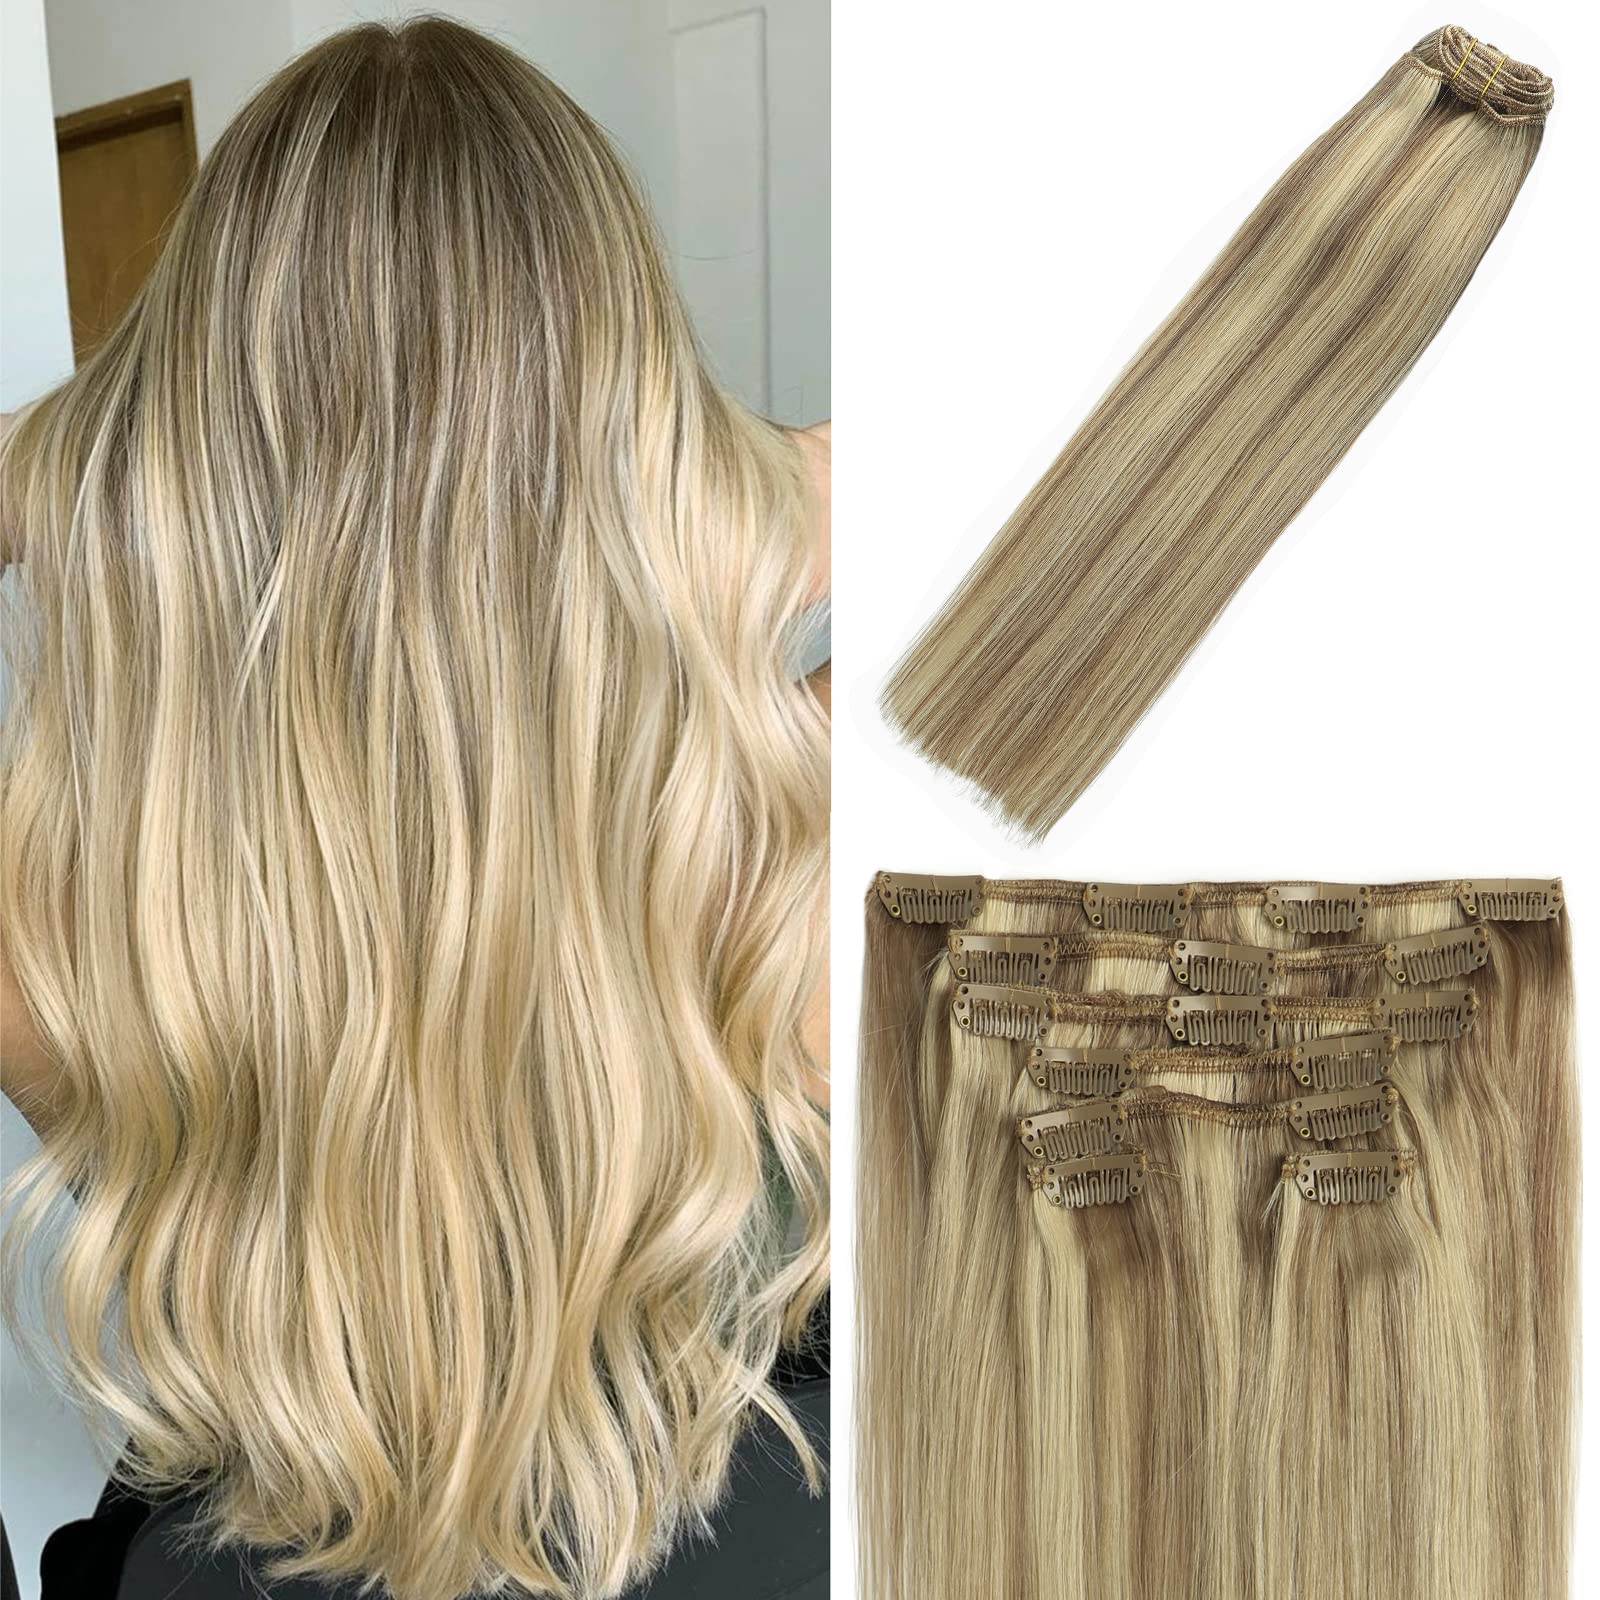 bone-straight-hair-extensions-straight-hair-is-becoming-a-trend-and-is-becoming-more-and-more-popular-all-over-the-world-1